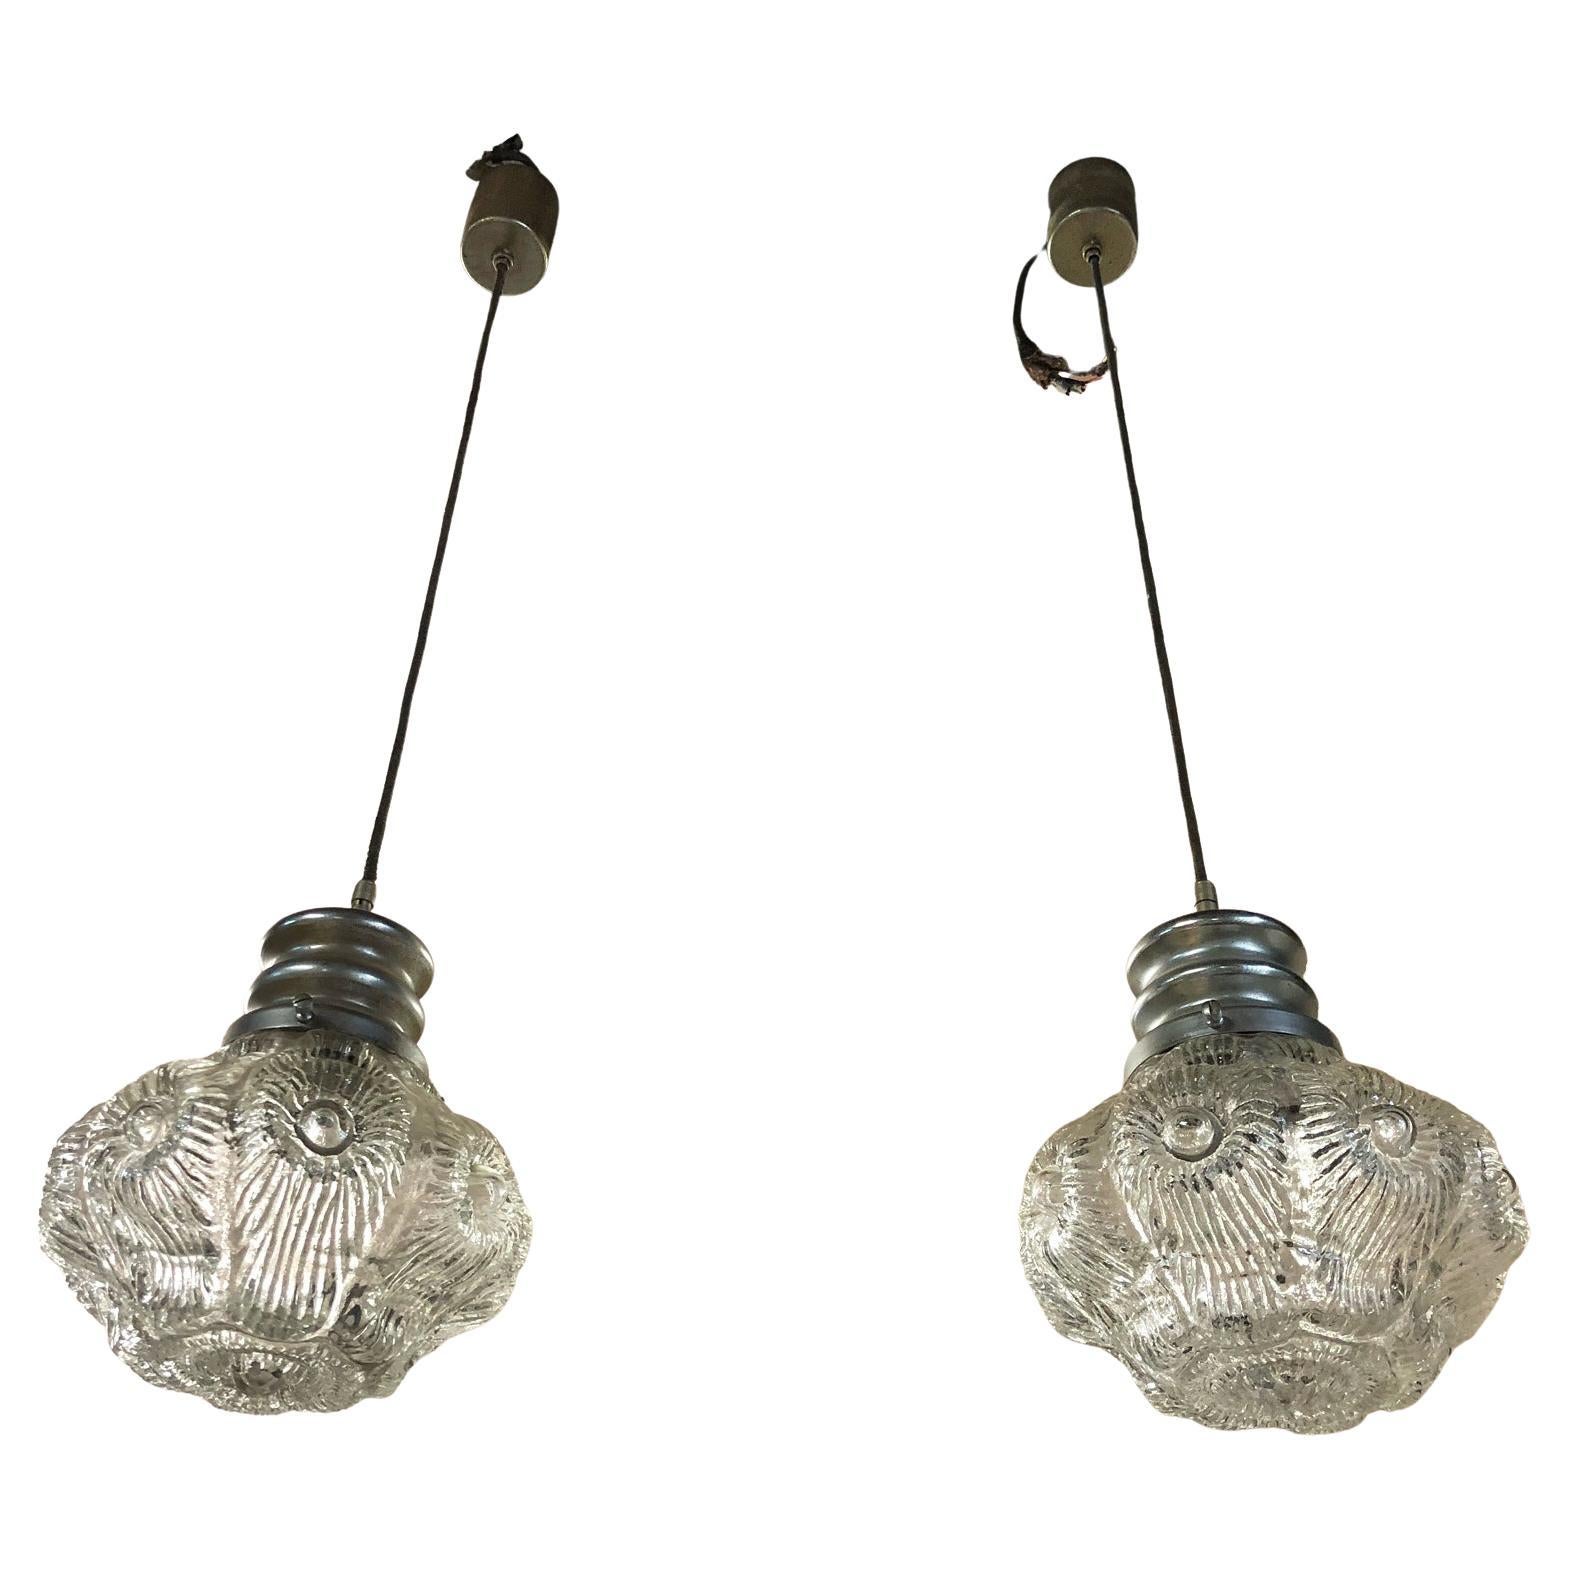 Pair of Original 1960s Italian Chandeliers with Floral-Shaped Glass and Chromed For Sale